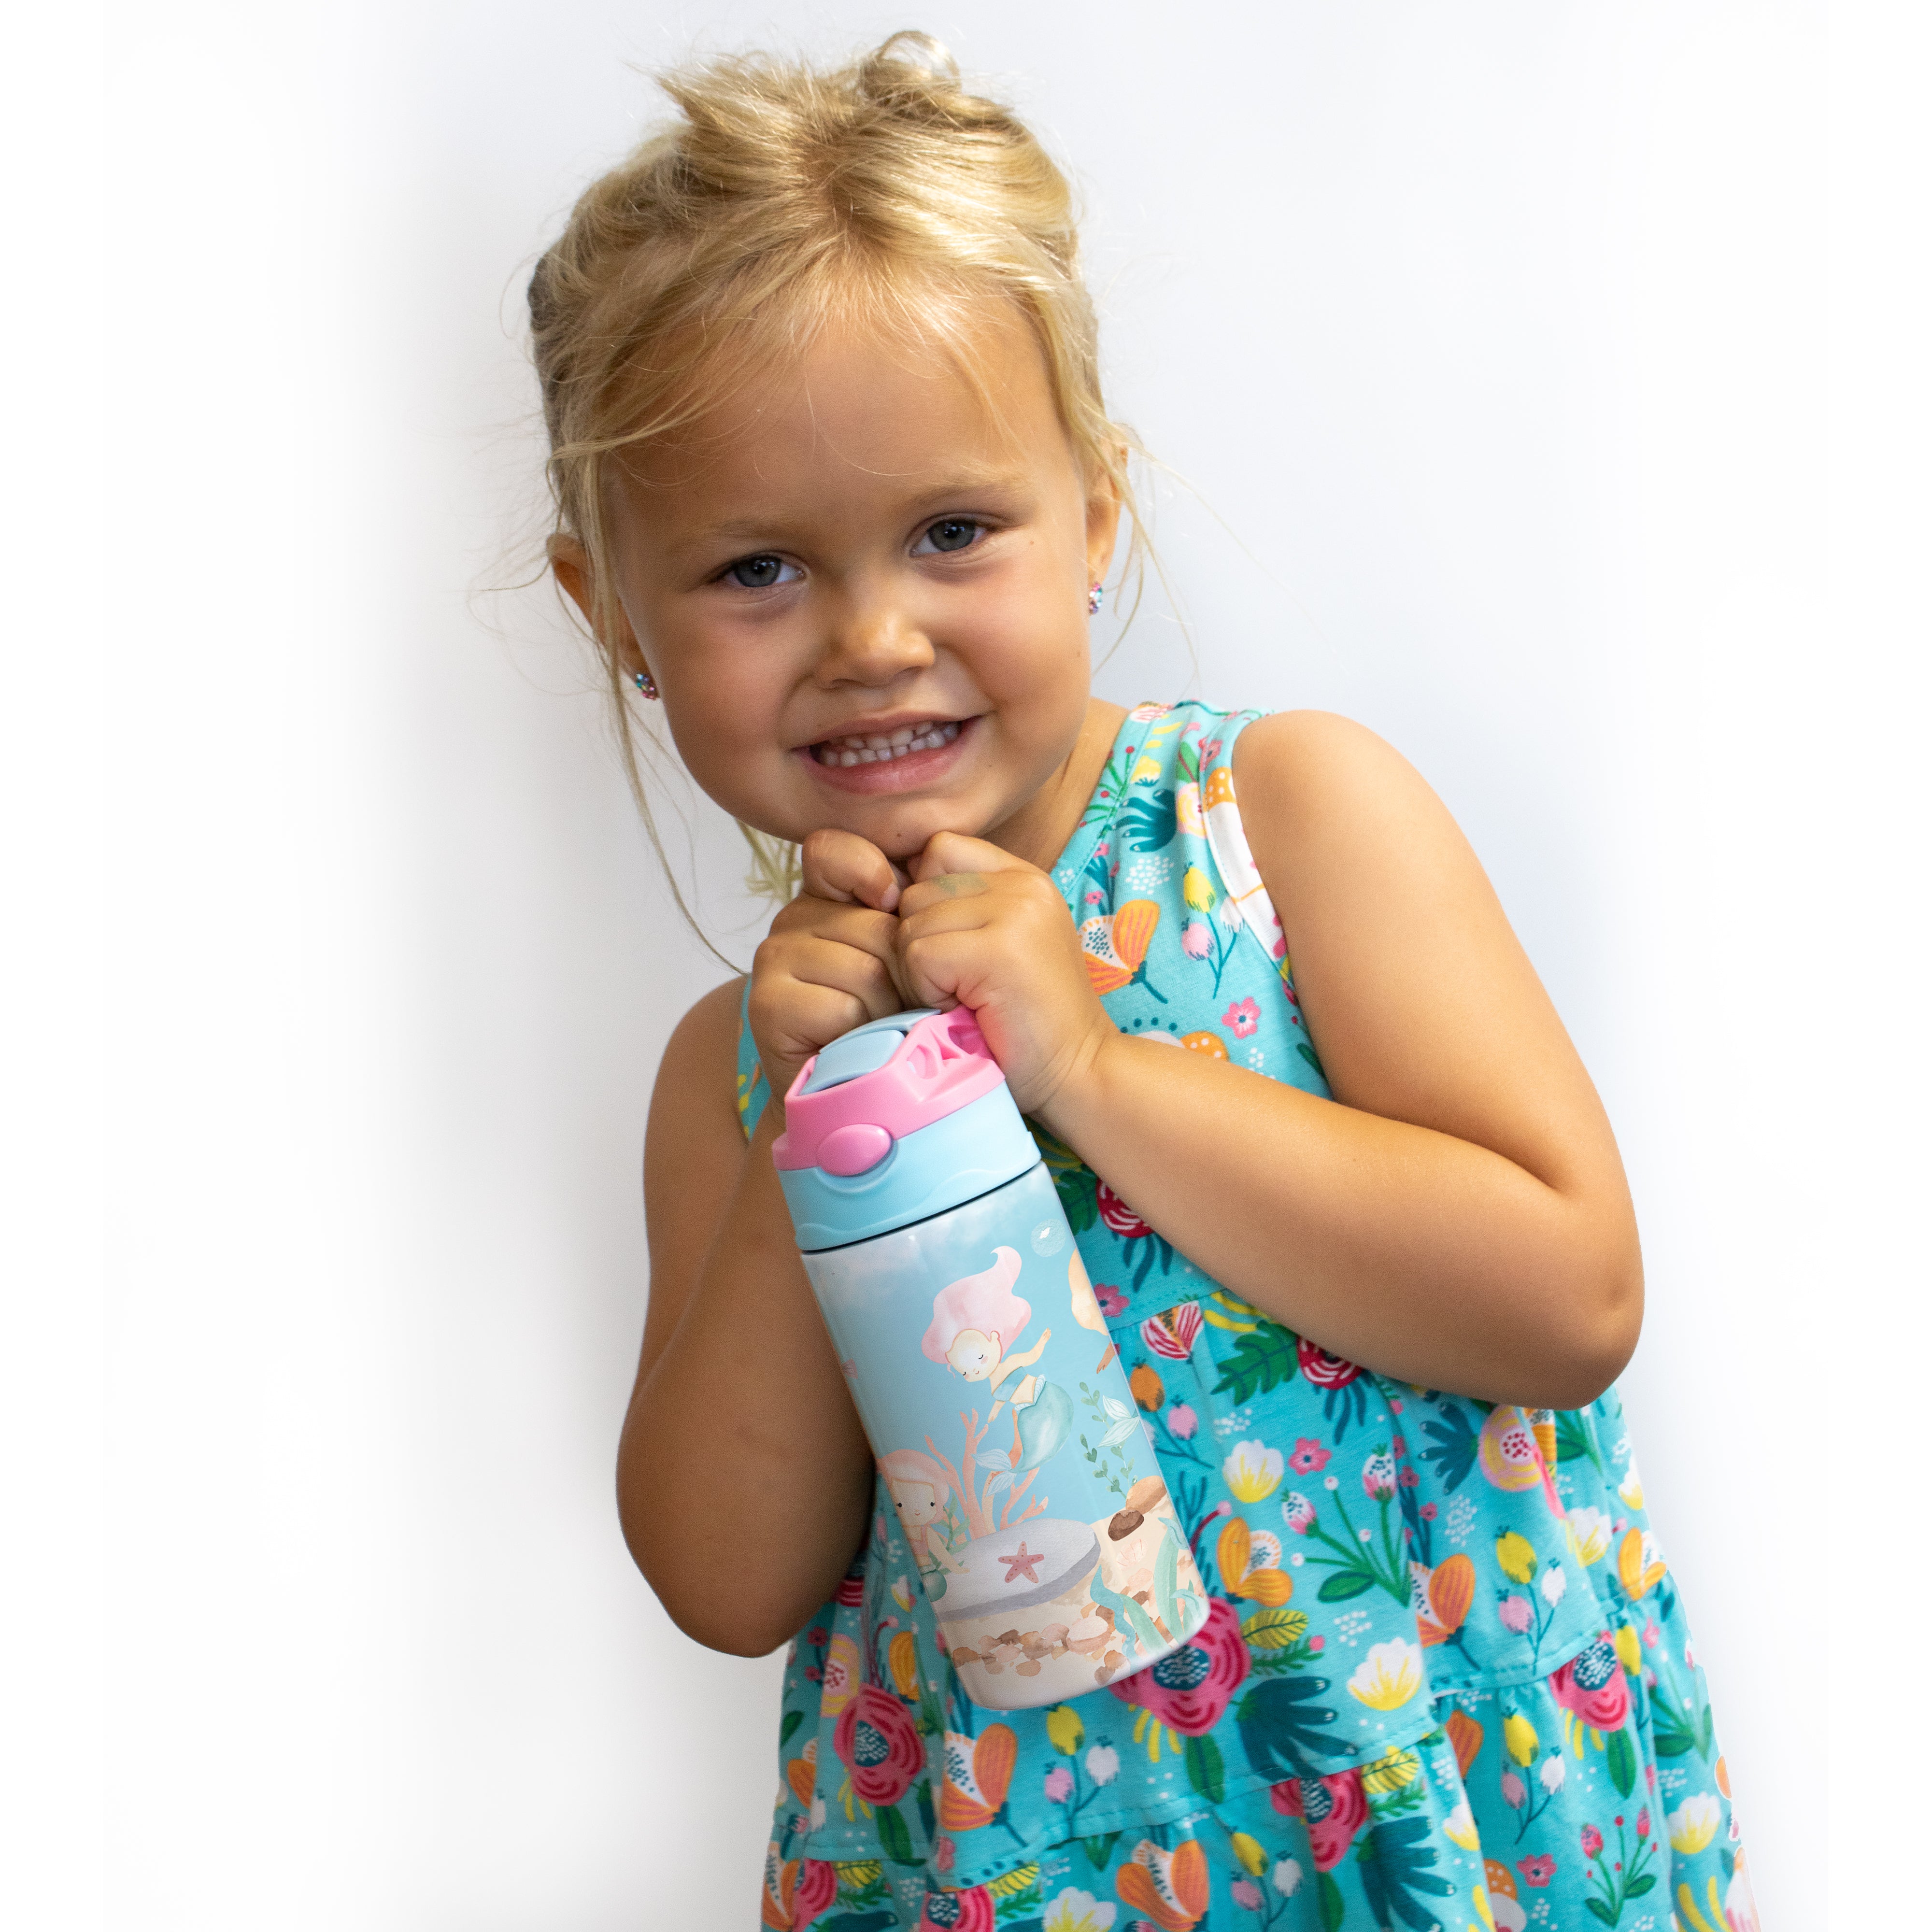 Trend Setters Original (Mermaids - Personalize with Name) 12 oz Stainless Steel Water Bottle with Pink and Blue Lid